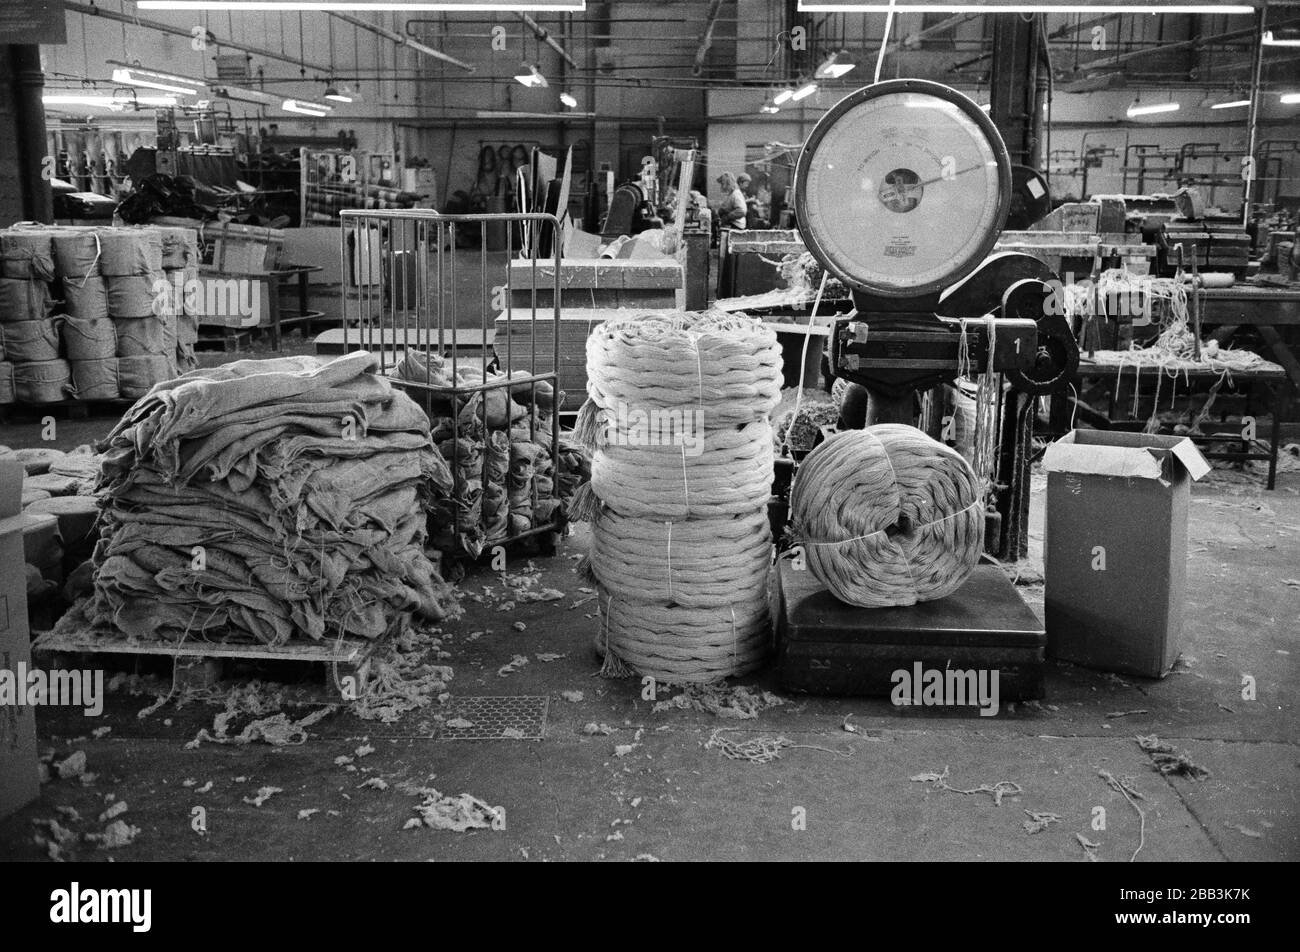 Circular processed jute being weighed at Tay Spinners mill in Dundee, Scotland. This factory was the last jute spinning mill in Europe when it closed for the final time in 1998. The city of Dundee had been famous throughout history for the three 'Js' - jute, jam and journalism. Stock Photo